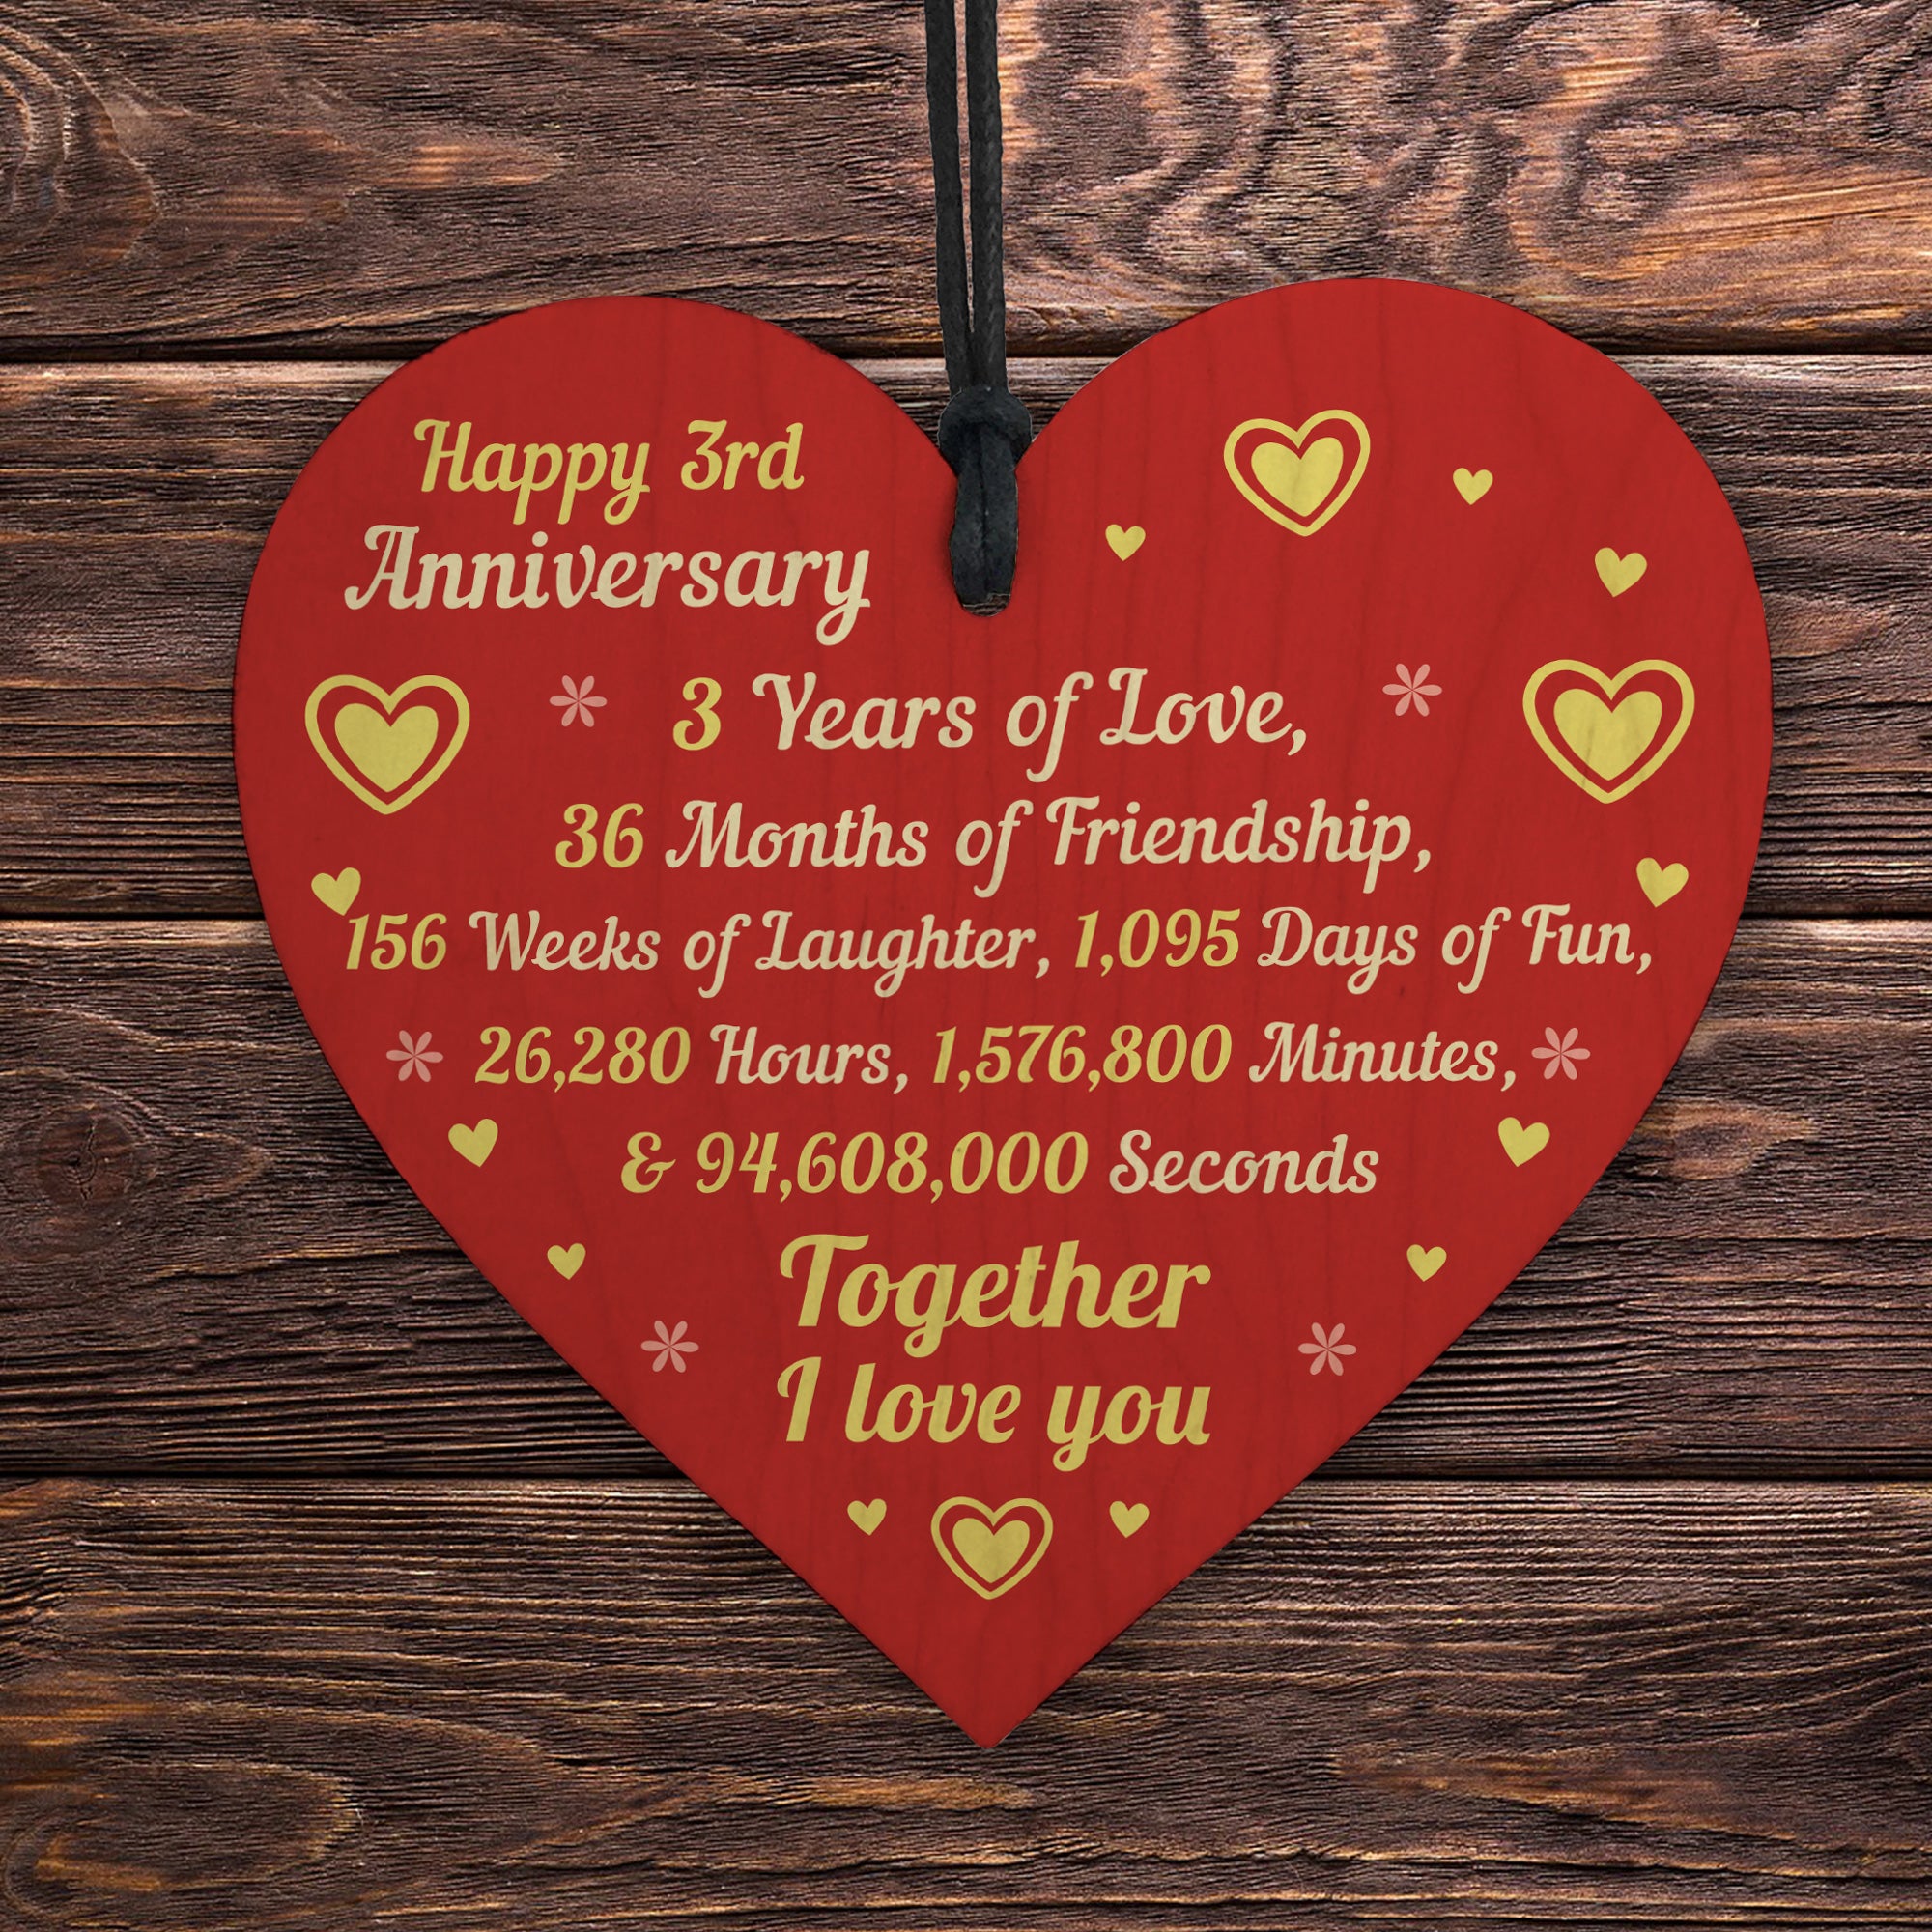 Personalized Photo Engraved Heart Shaped Wood Plaque |Anniversary Gift -  woodgeekstore